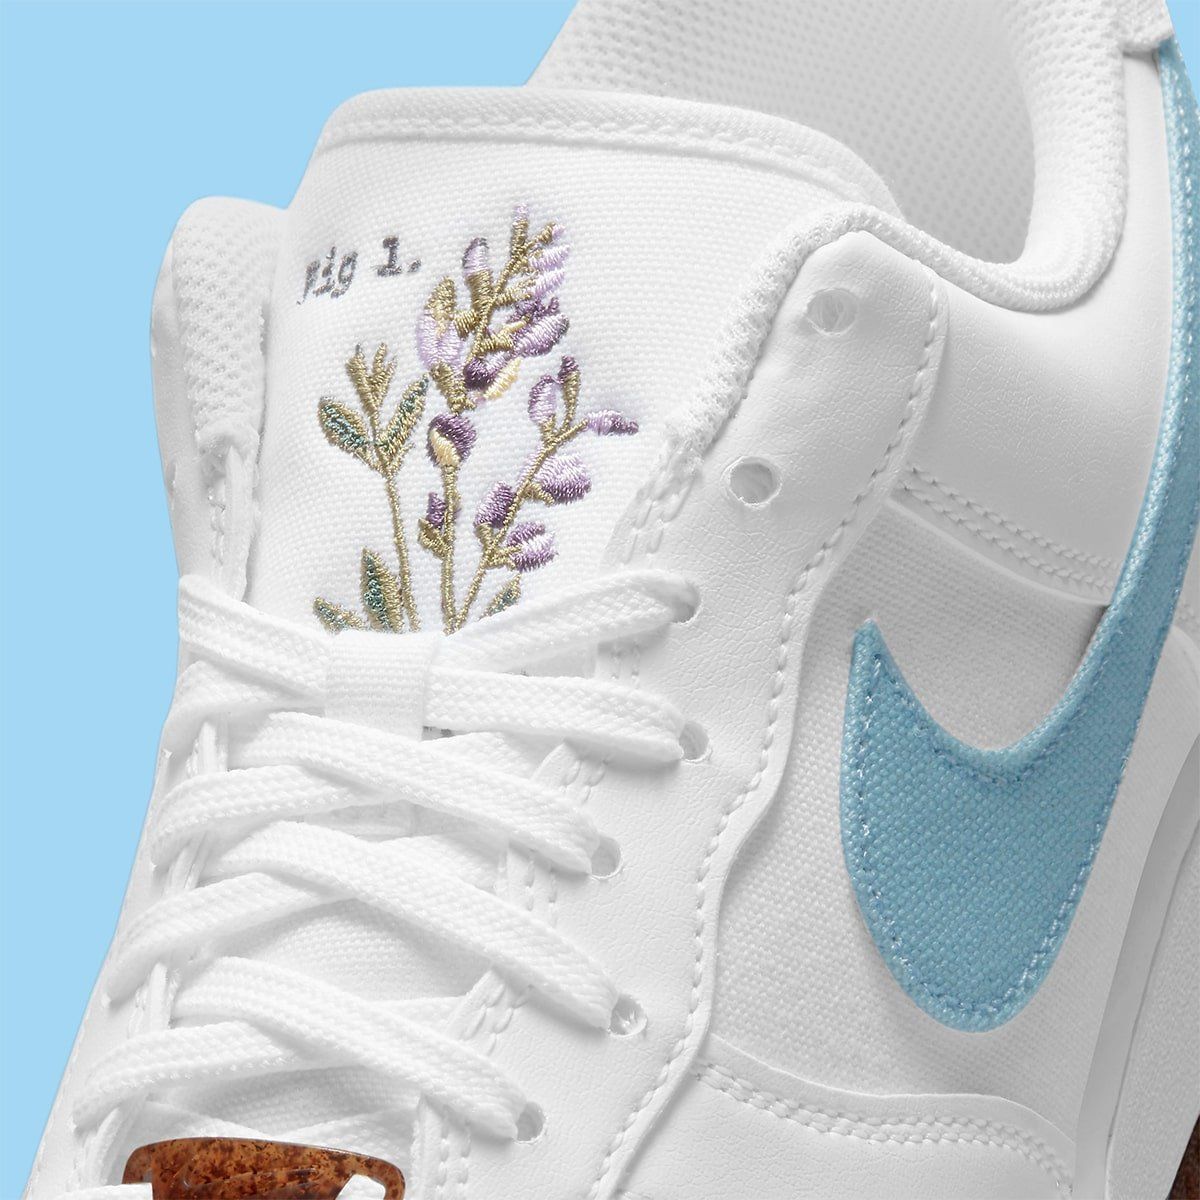 nike with flowers sneakers